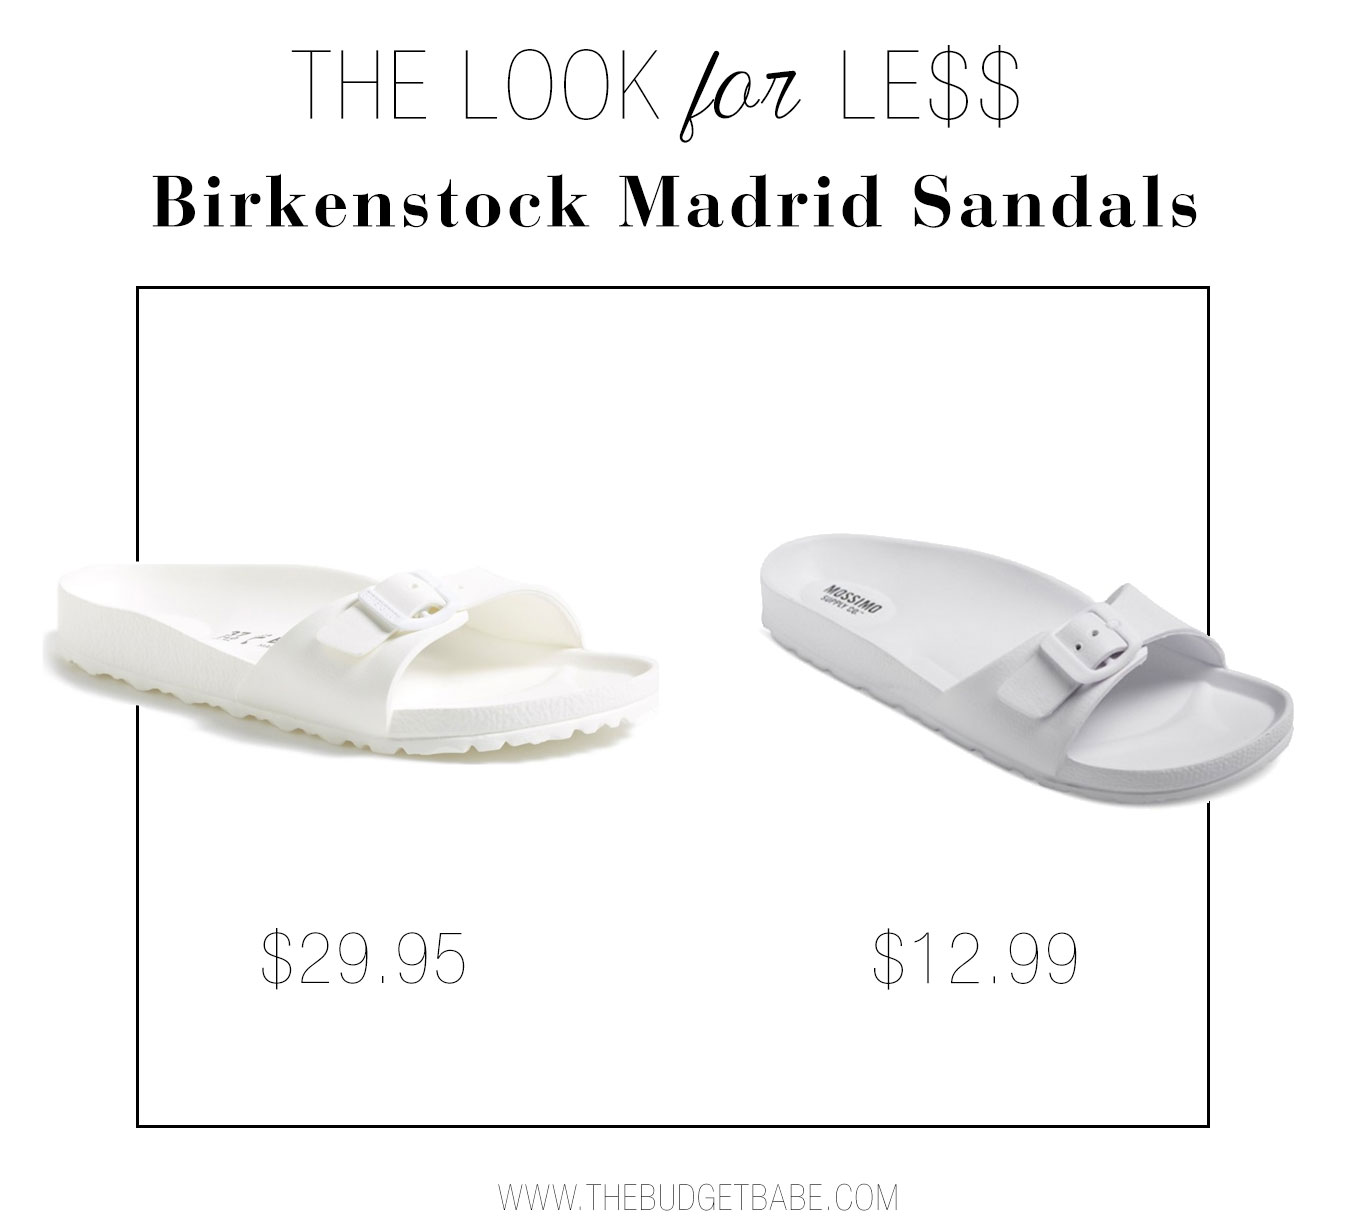 Birkenstock Madrid sandals get knocked off by Mossimo at Target.